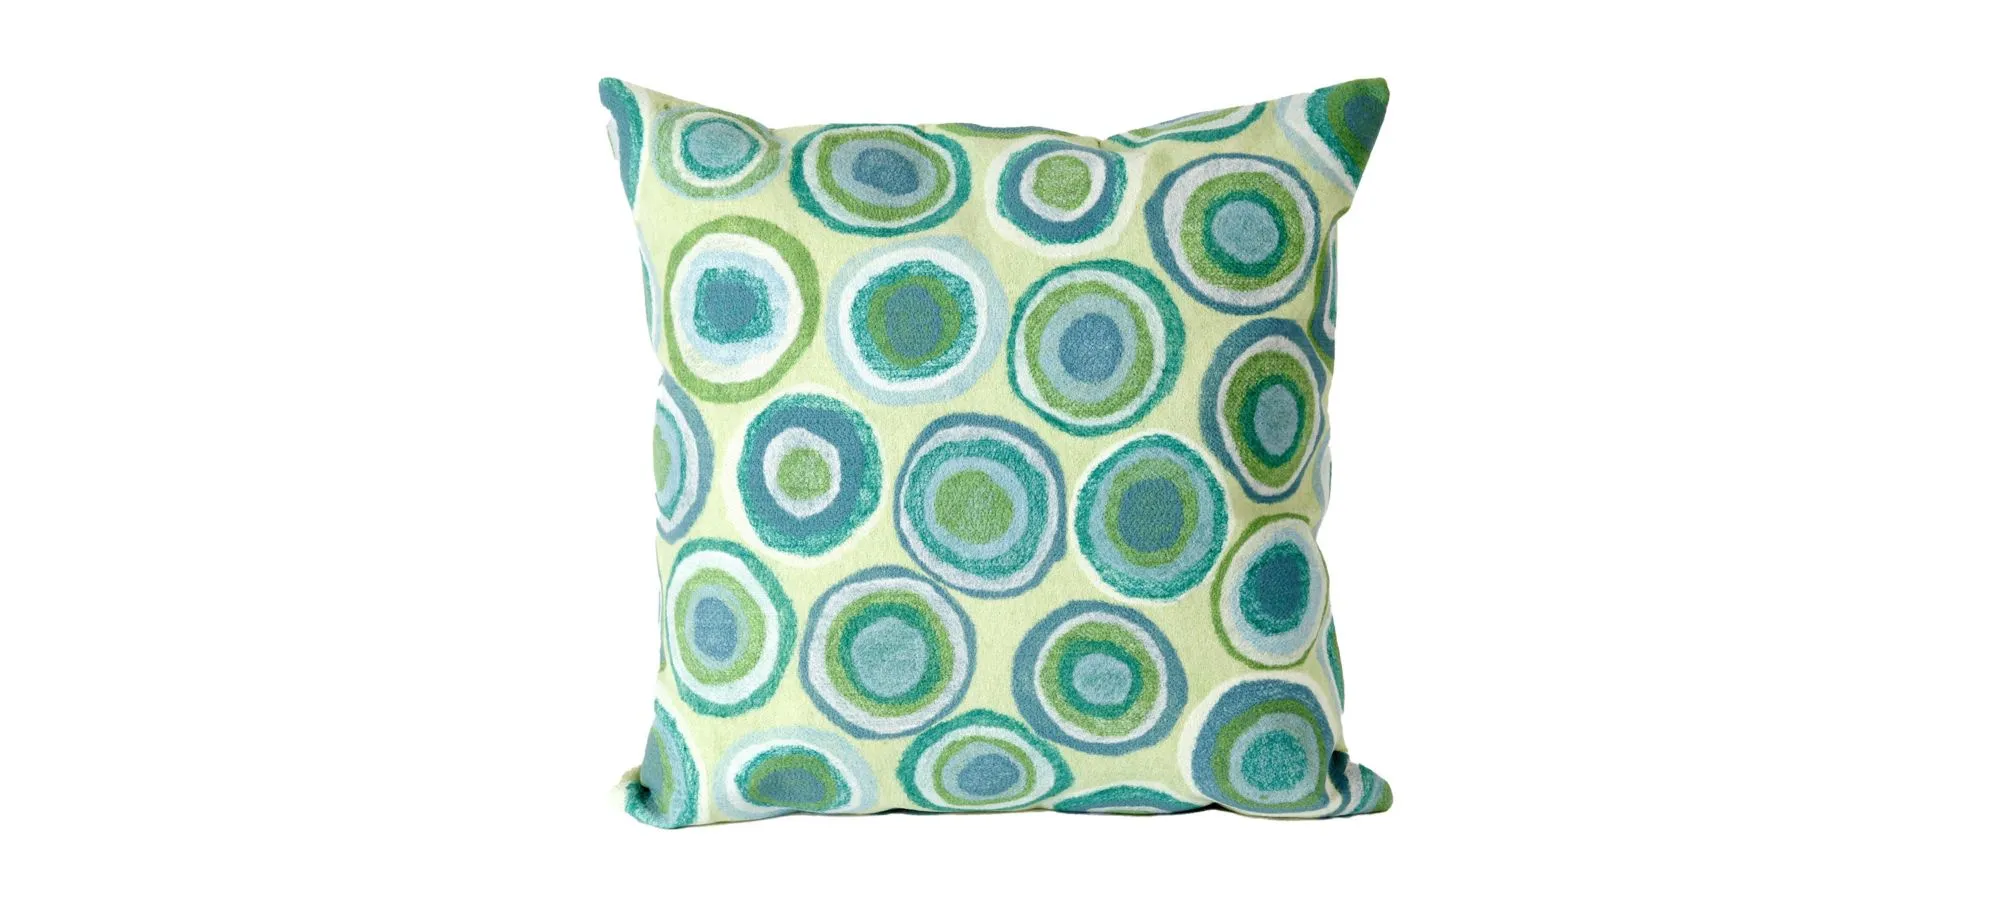 Liora Manne Visions II Puddle Dot Pillow in Green by Trans-Ocean Import Co Inc